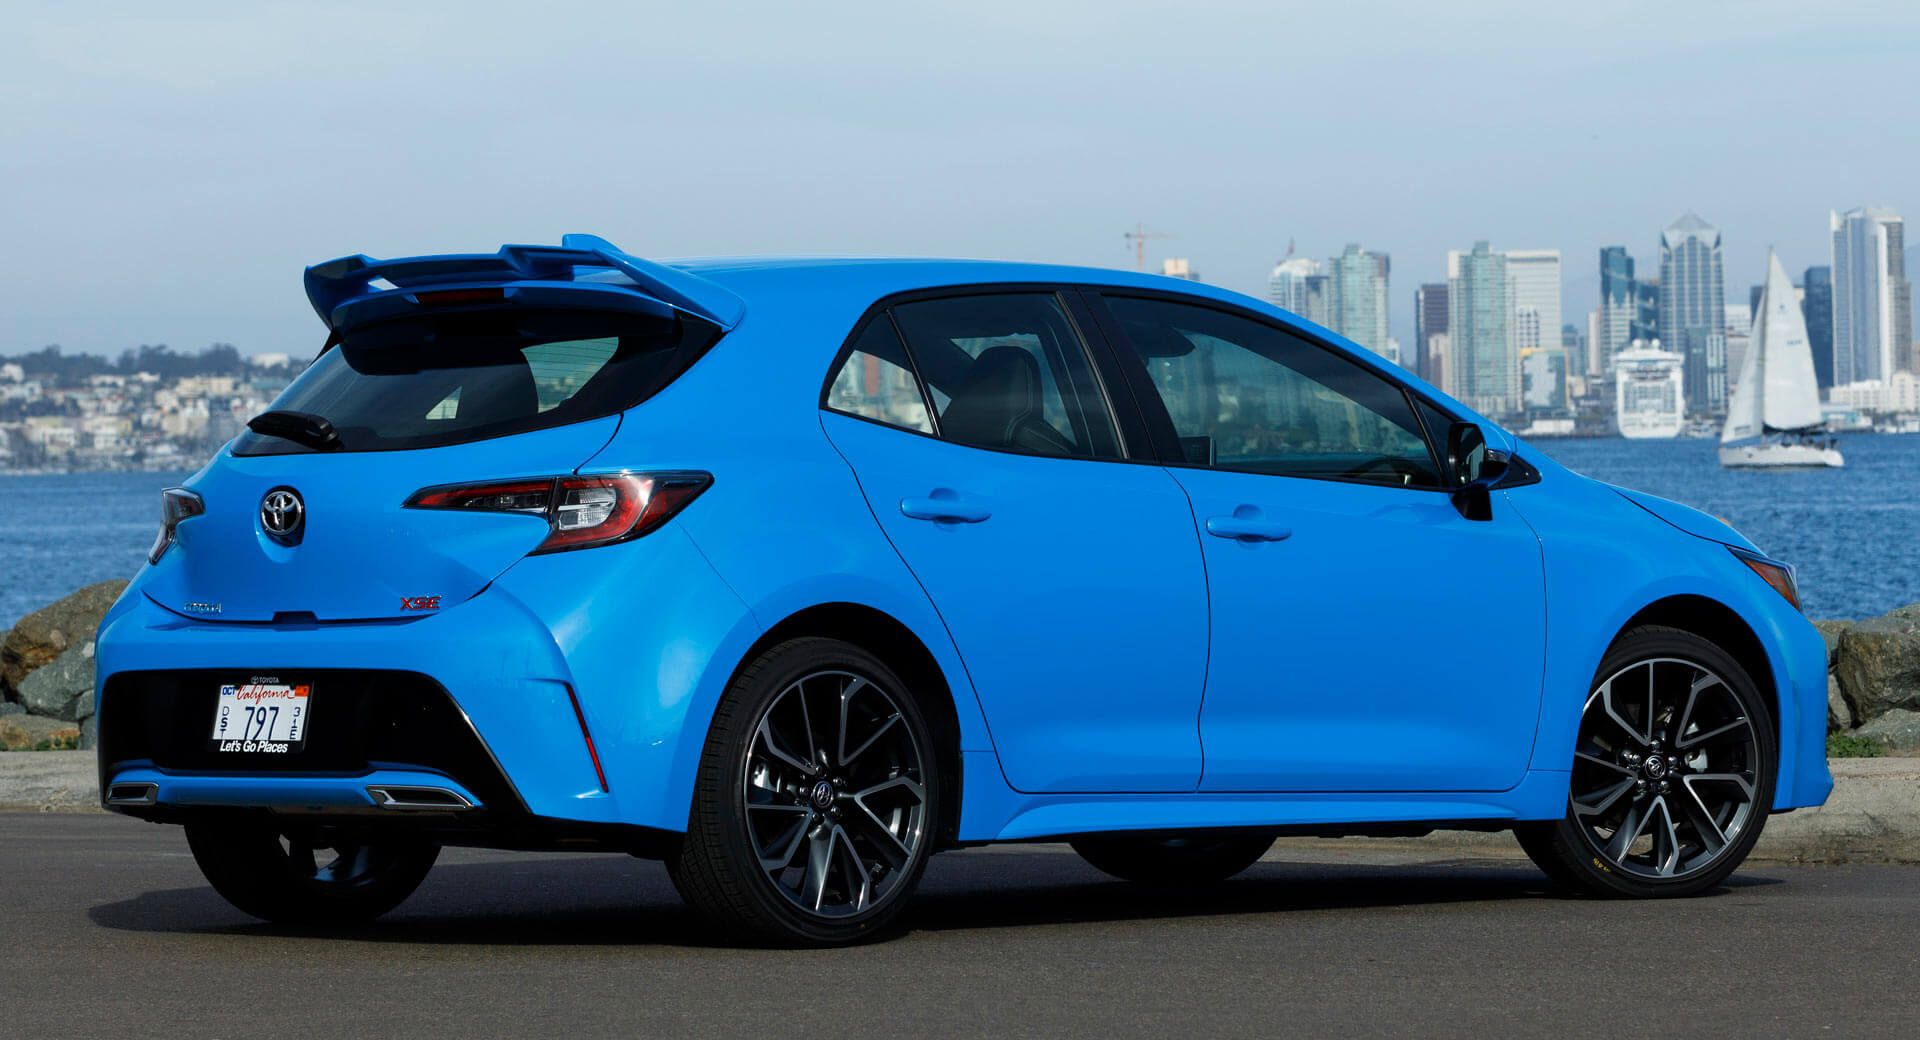 Brand new 2019 Toyota Corolla Hatchback aims to please